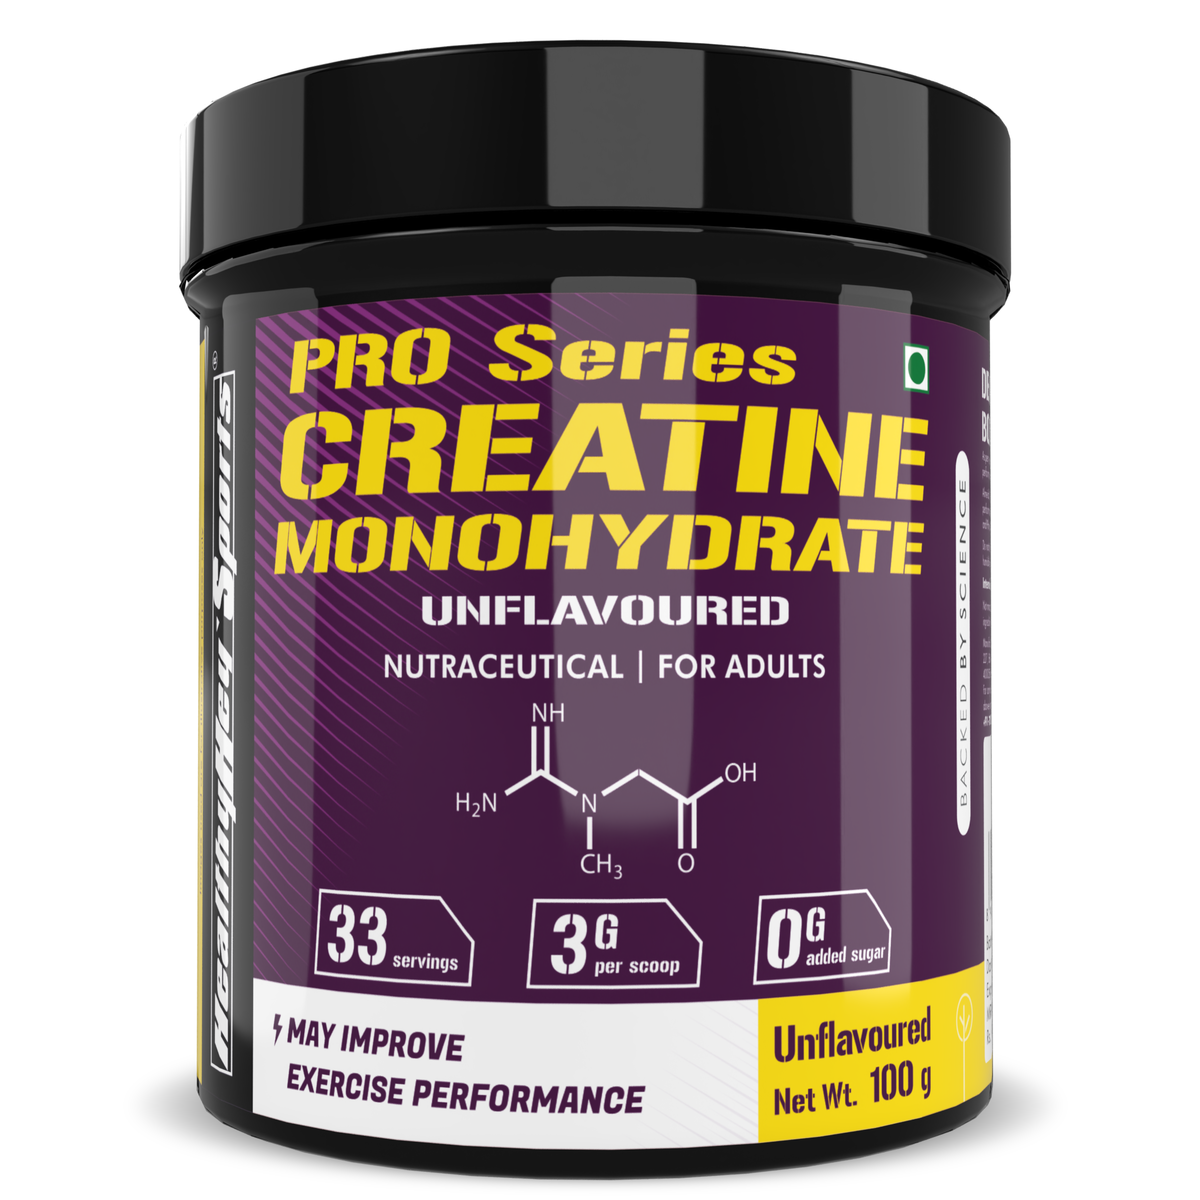 Creatine Monohydrate, May Improve exercise performance - Premium Quality - For Muscle Growth - HealthyHey Nutrition